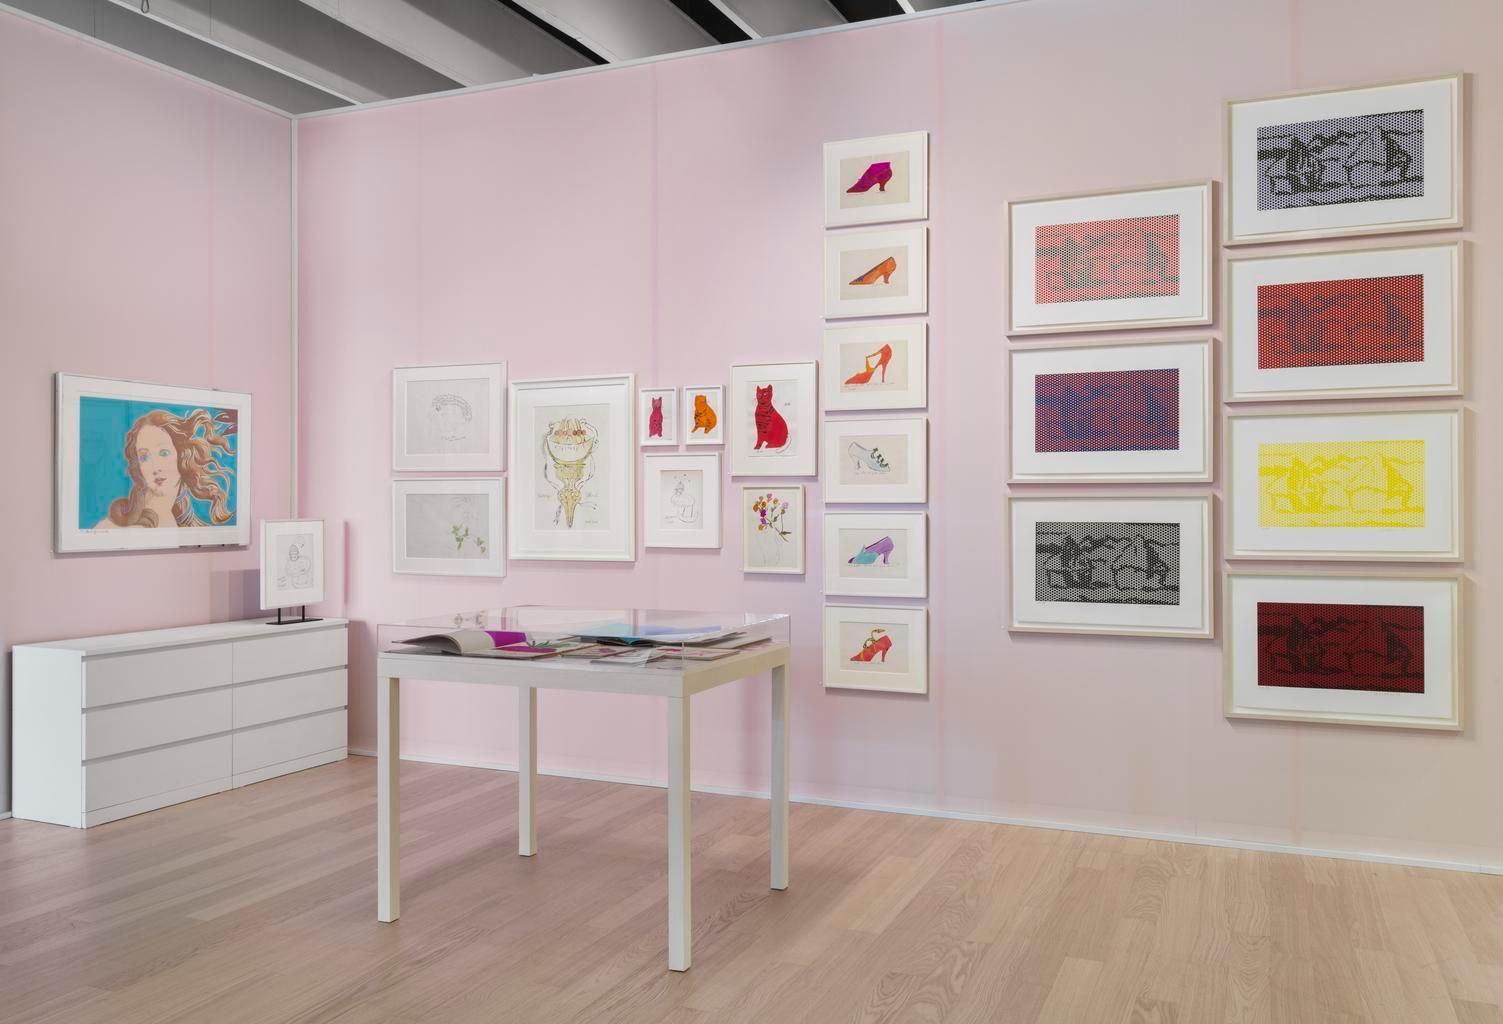 The Armory Show 2018 at Susan Sheehan Gallery